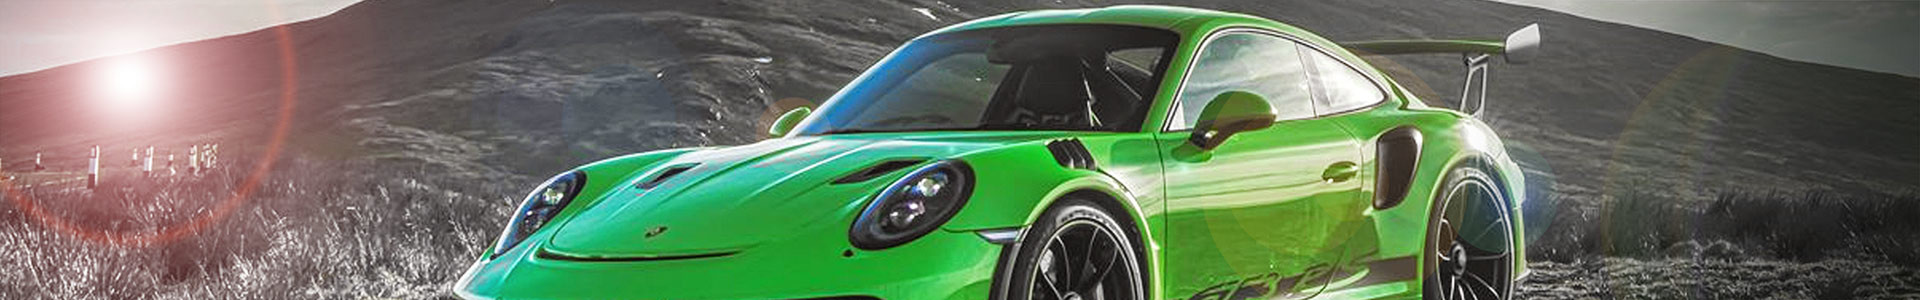 These are the only Porsche repair shops we recommend